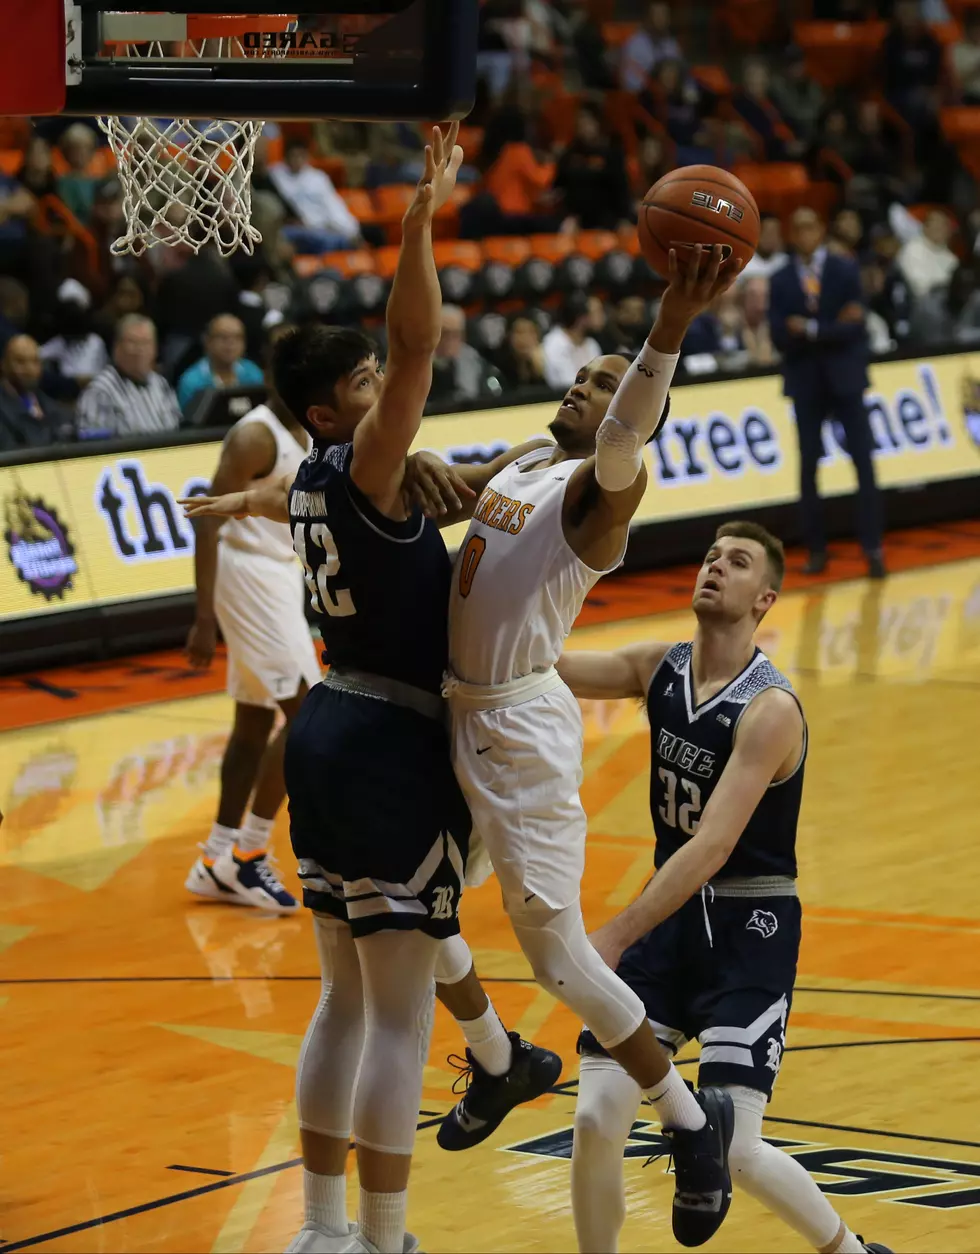 The Next Step for UTEP Basketball is Winning on the Road